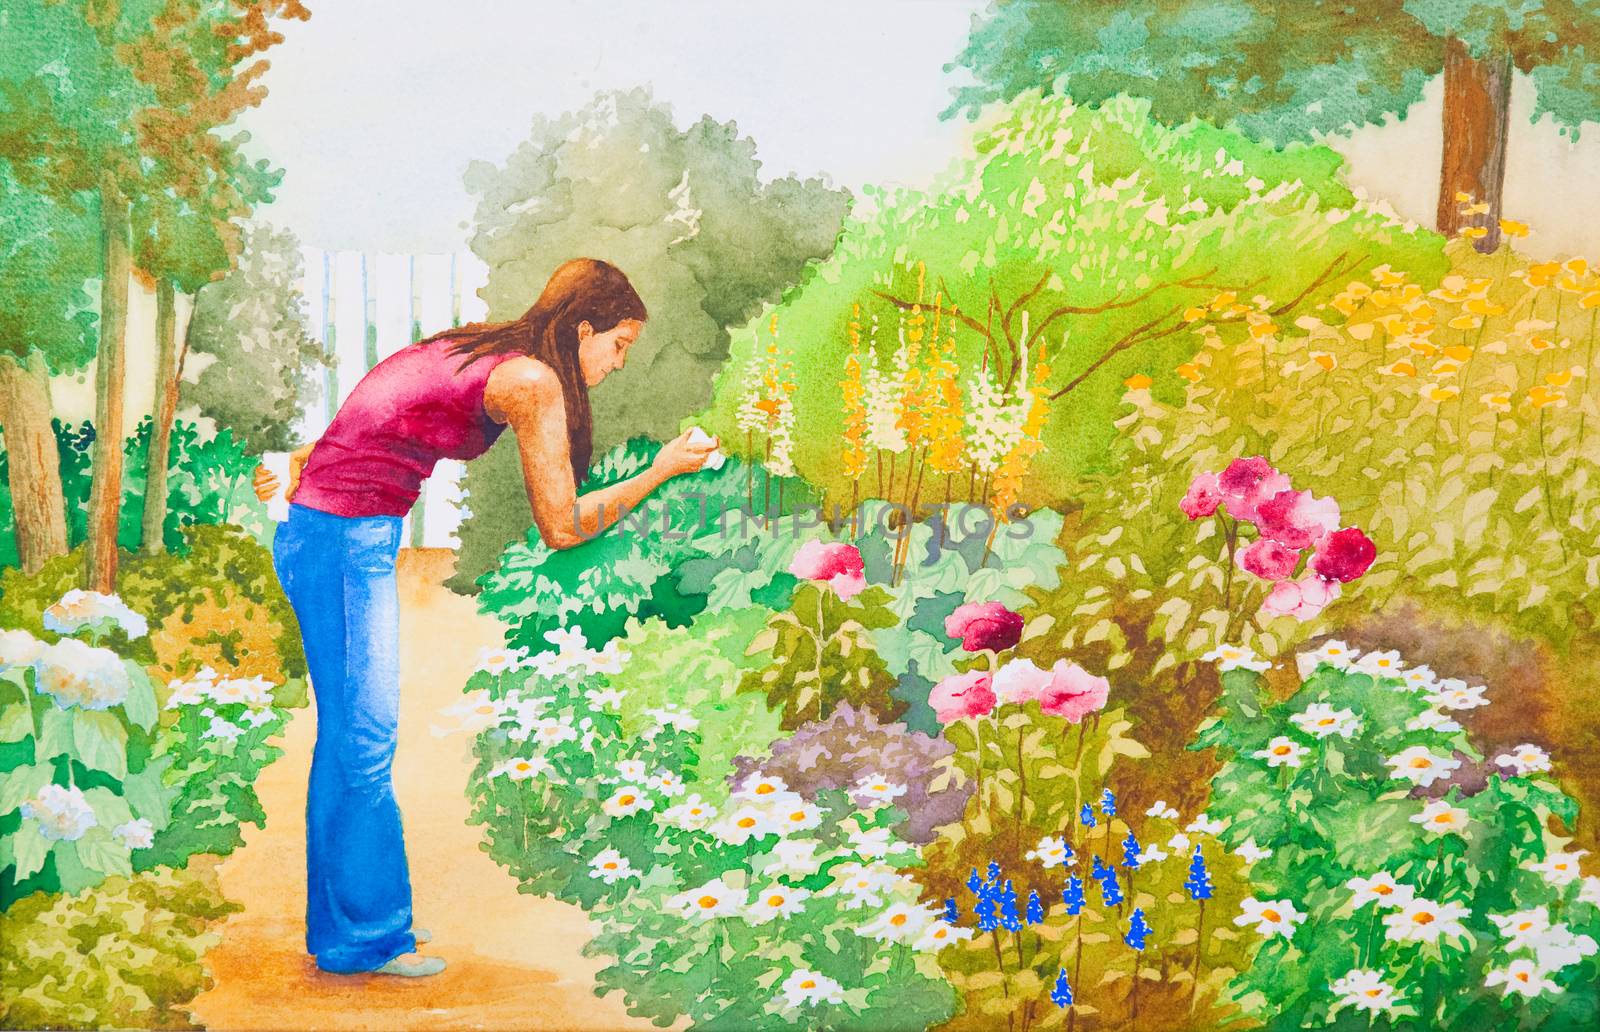  An original watercolor painting of a young girl taking pictures in a flower garden.  